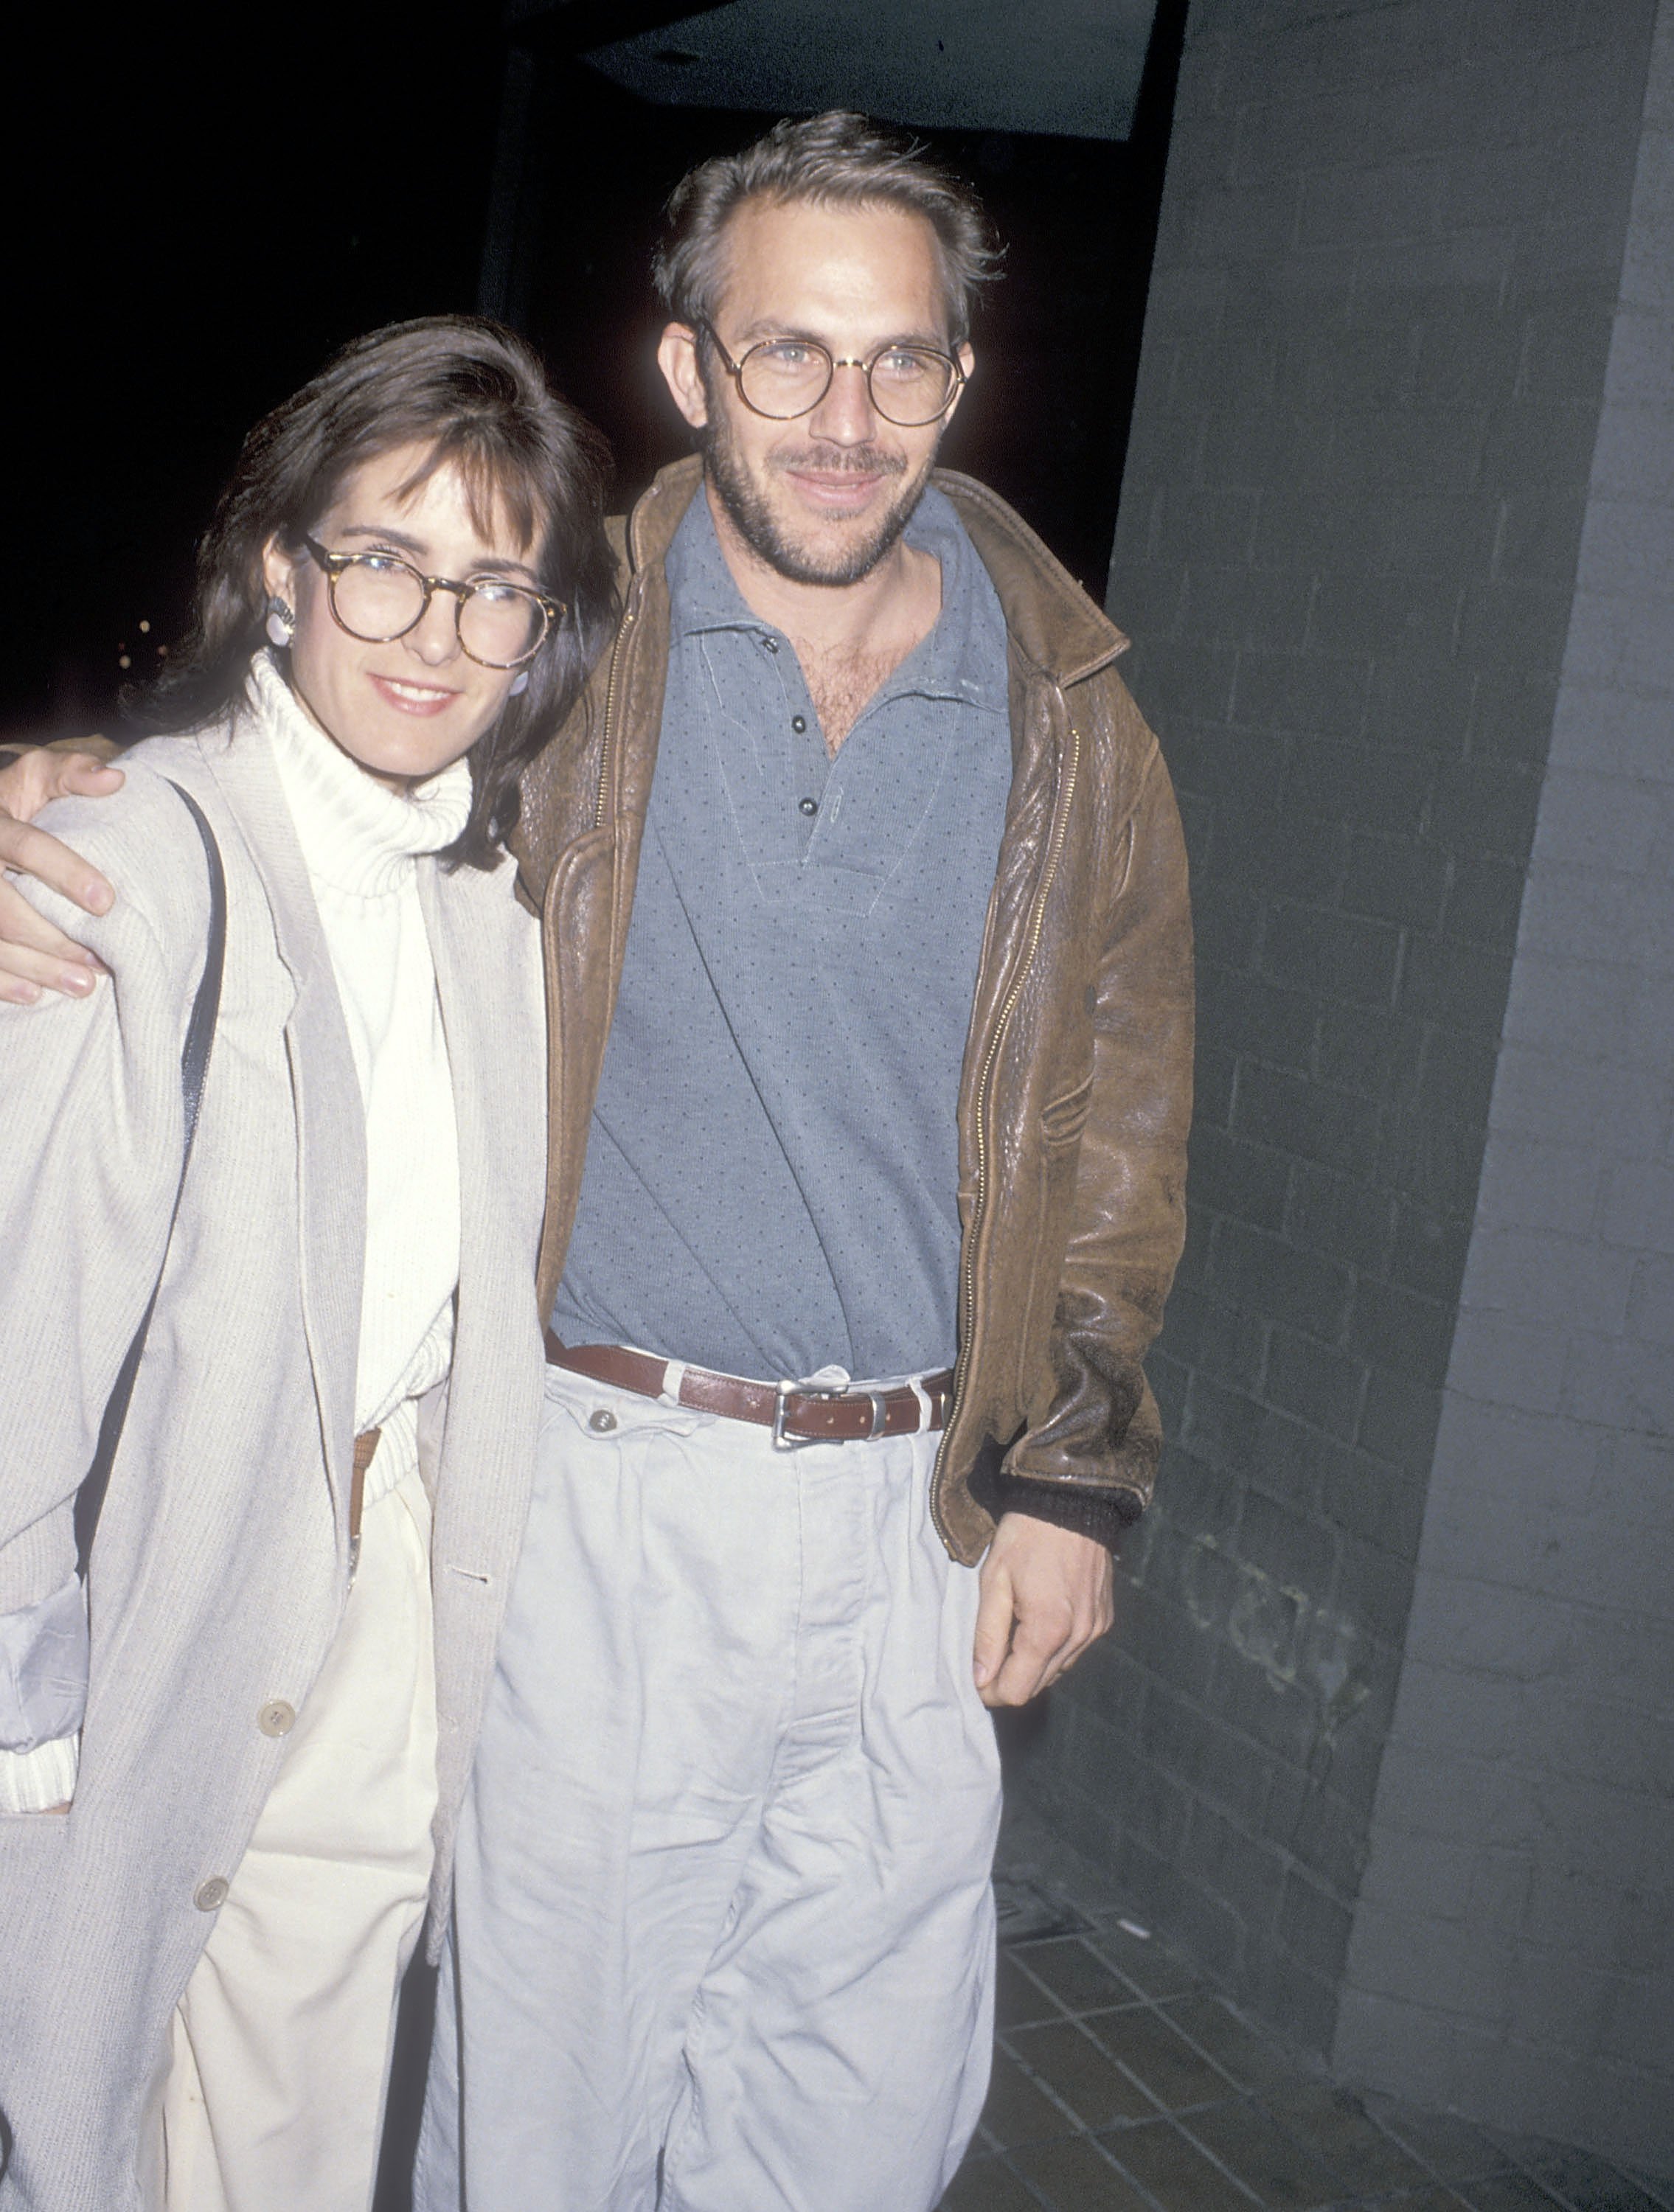 Actor Kevin Costner with Cindy Silva at the Westwood Playhouse in Westwood California, on January 13, 1989 | Source: Getty Images